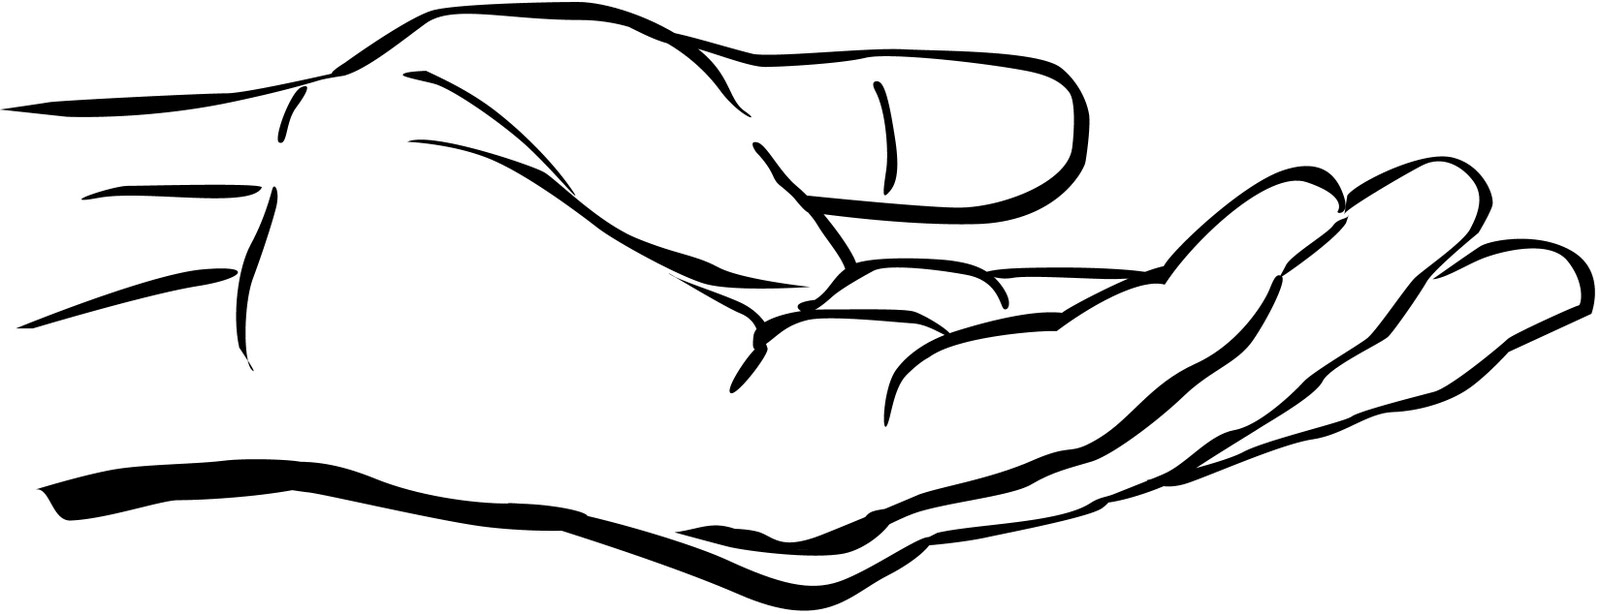 hands clipart black and white - Hands Clipart Black And White